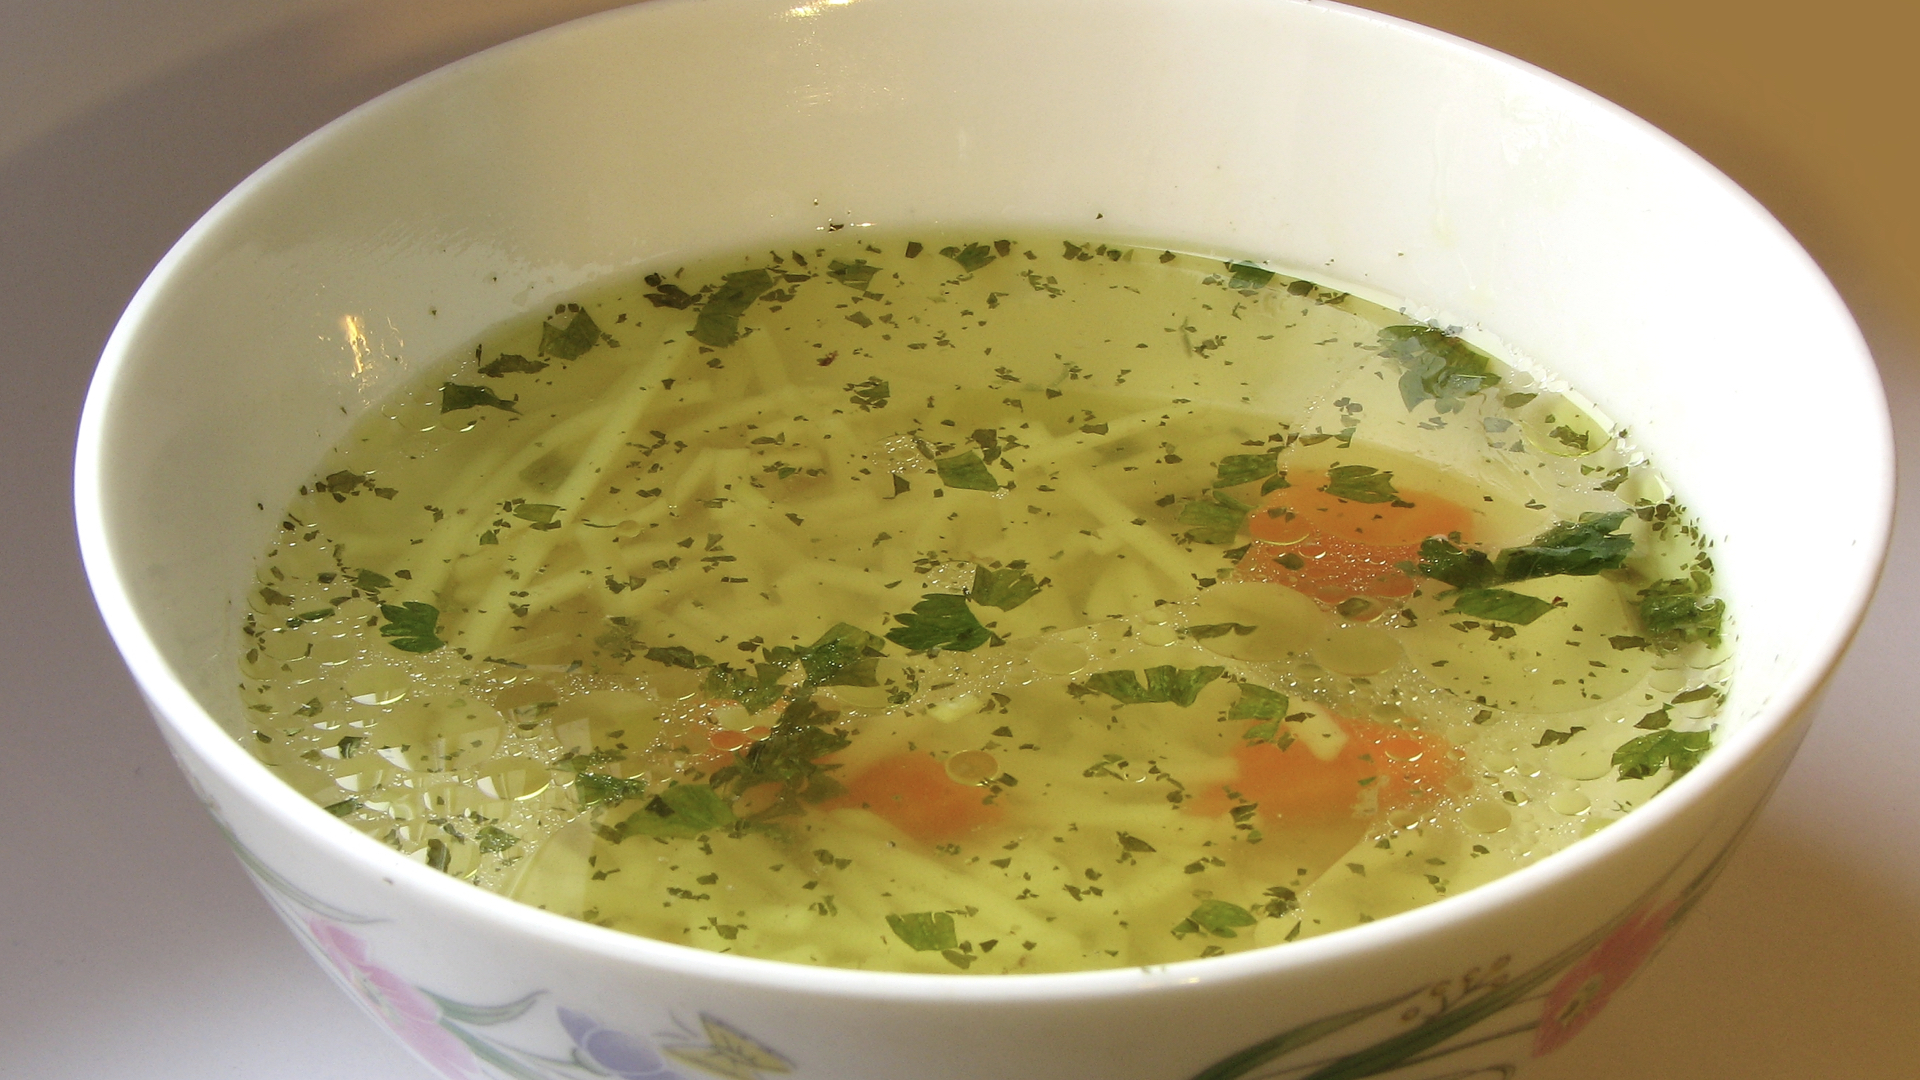 https://nutritionfacts.org/app/uploads/2018/03/Volume-41-3-How-Much-Lead-Is-in-Organic-Chicken-Soup-Bone-Broth.jpeg